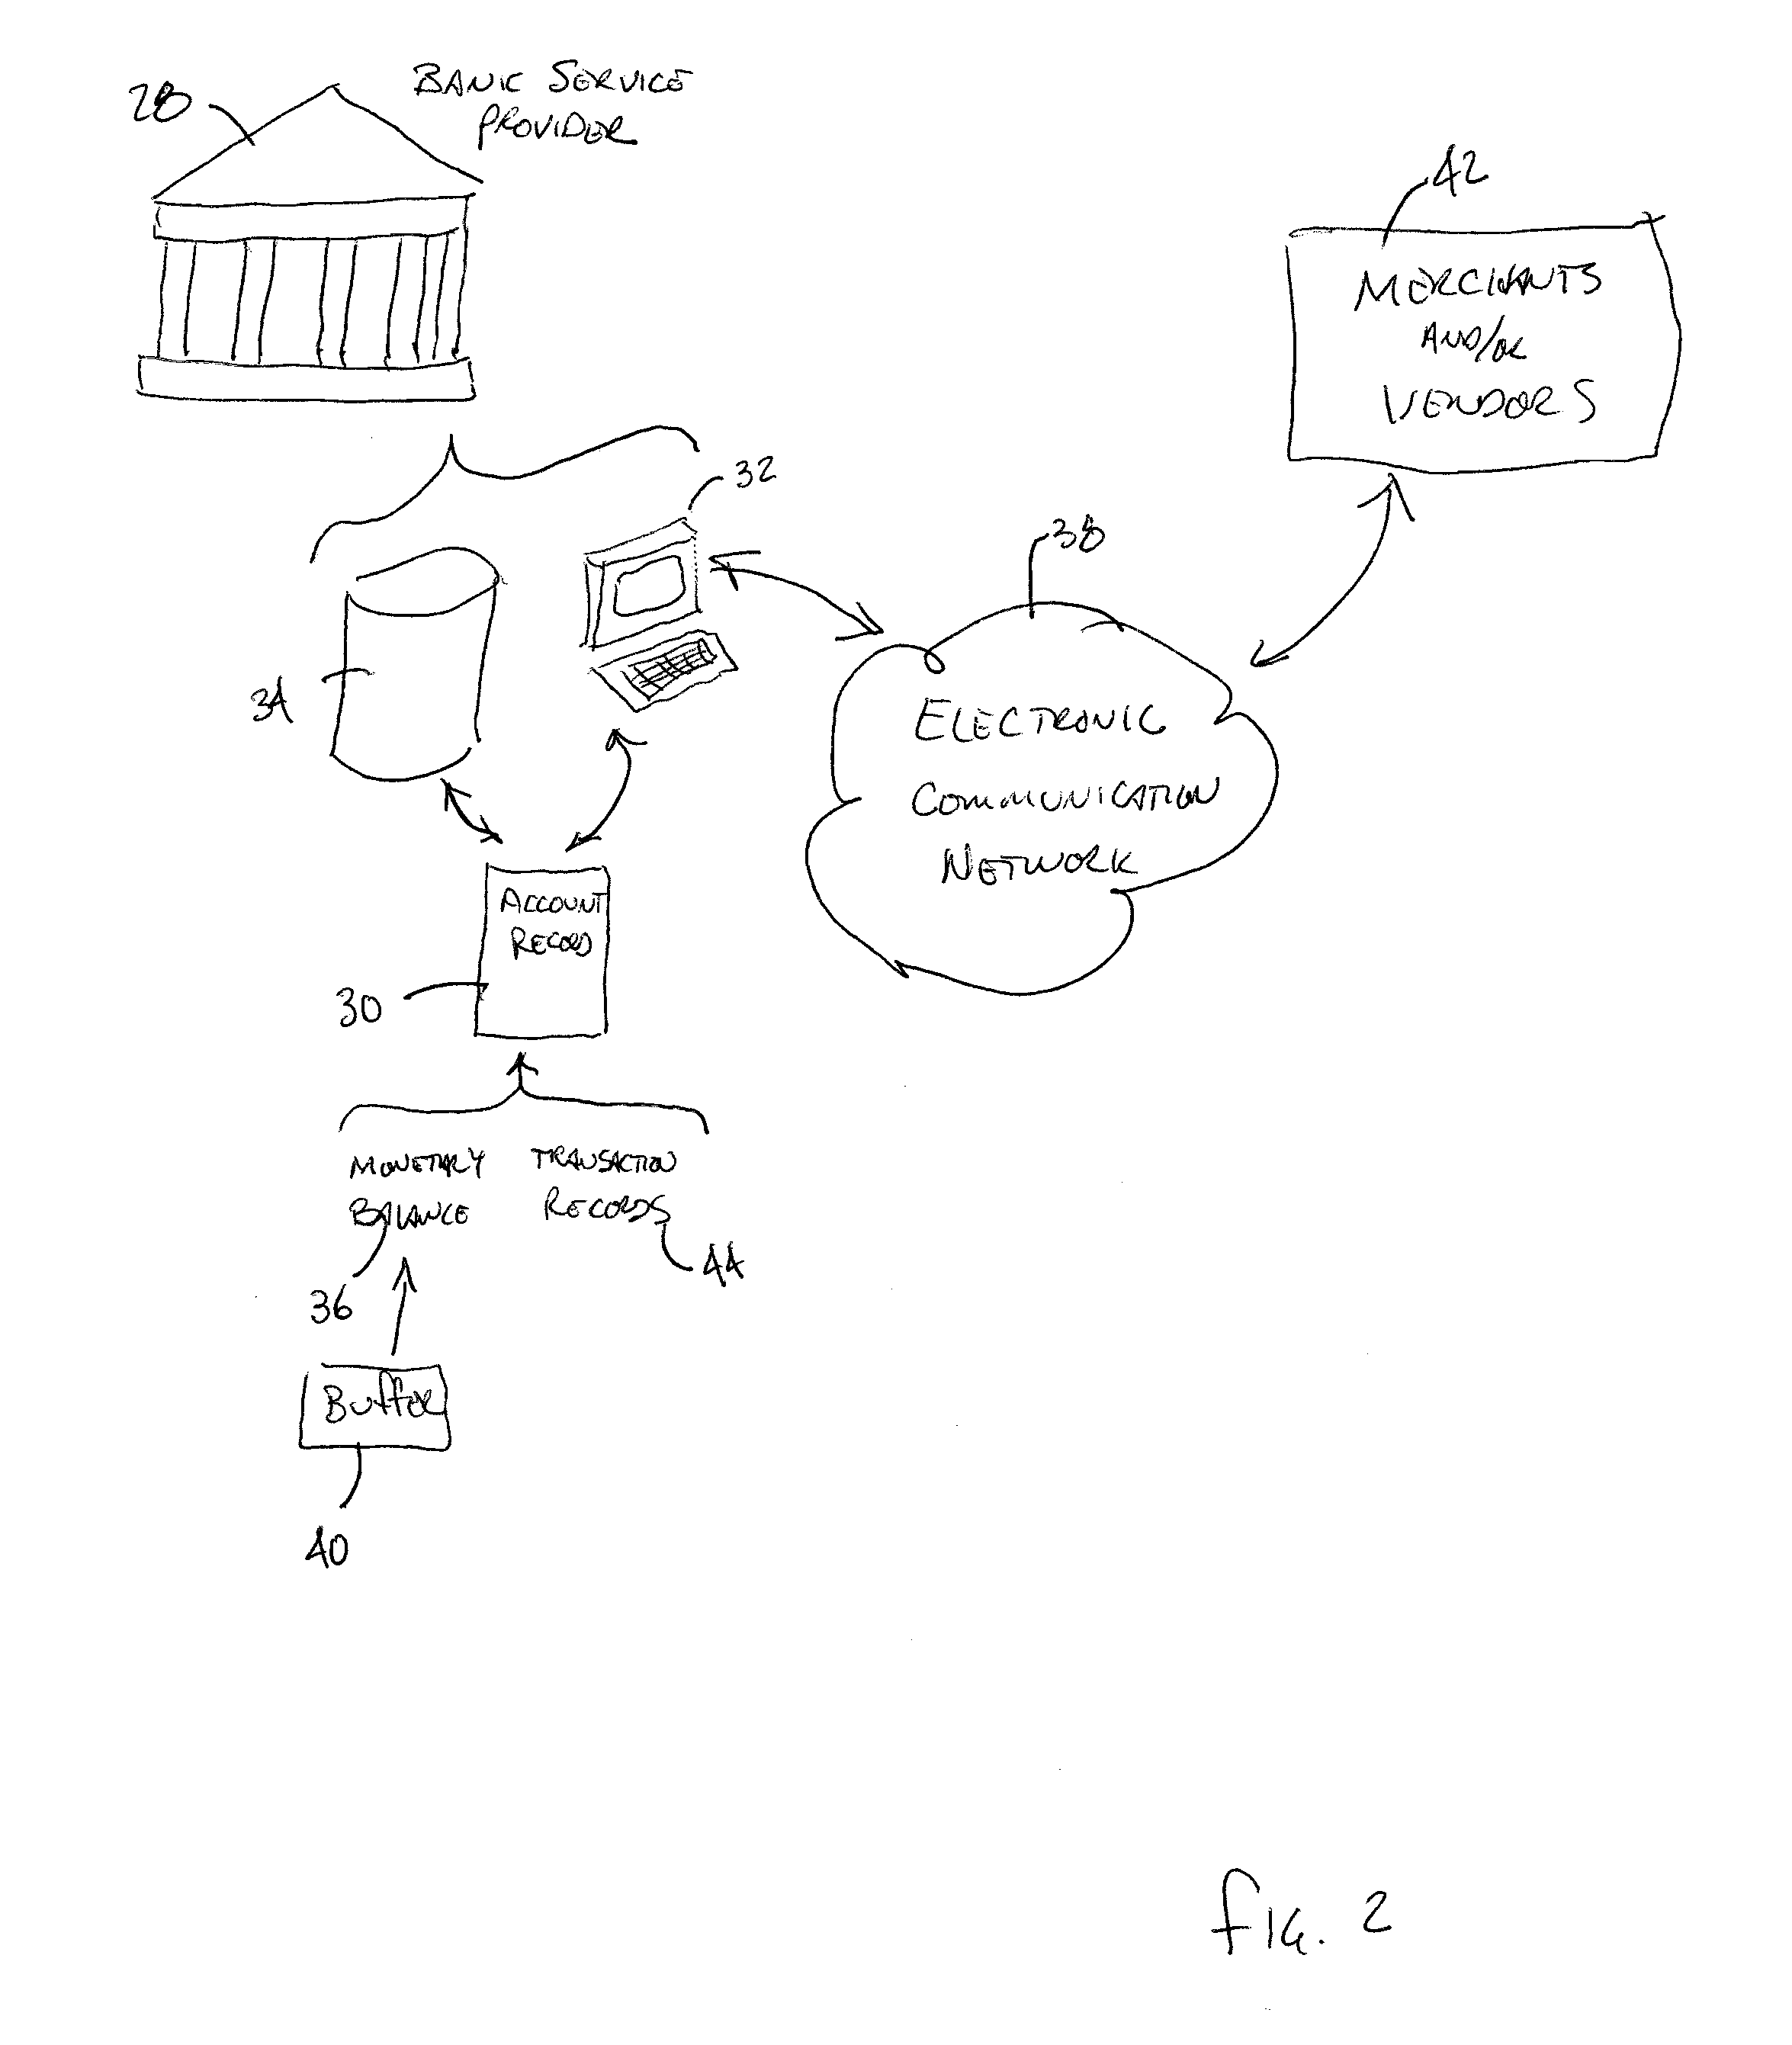 Method of providing an account that employs a buffer against overdrafts